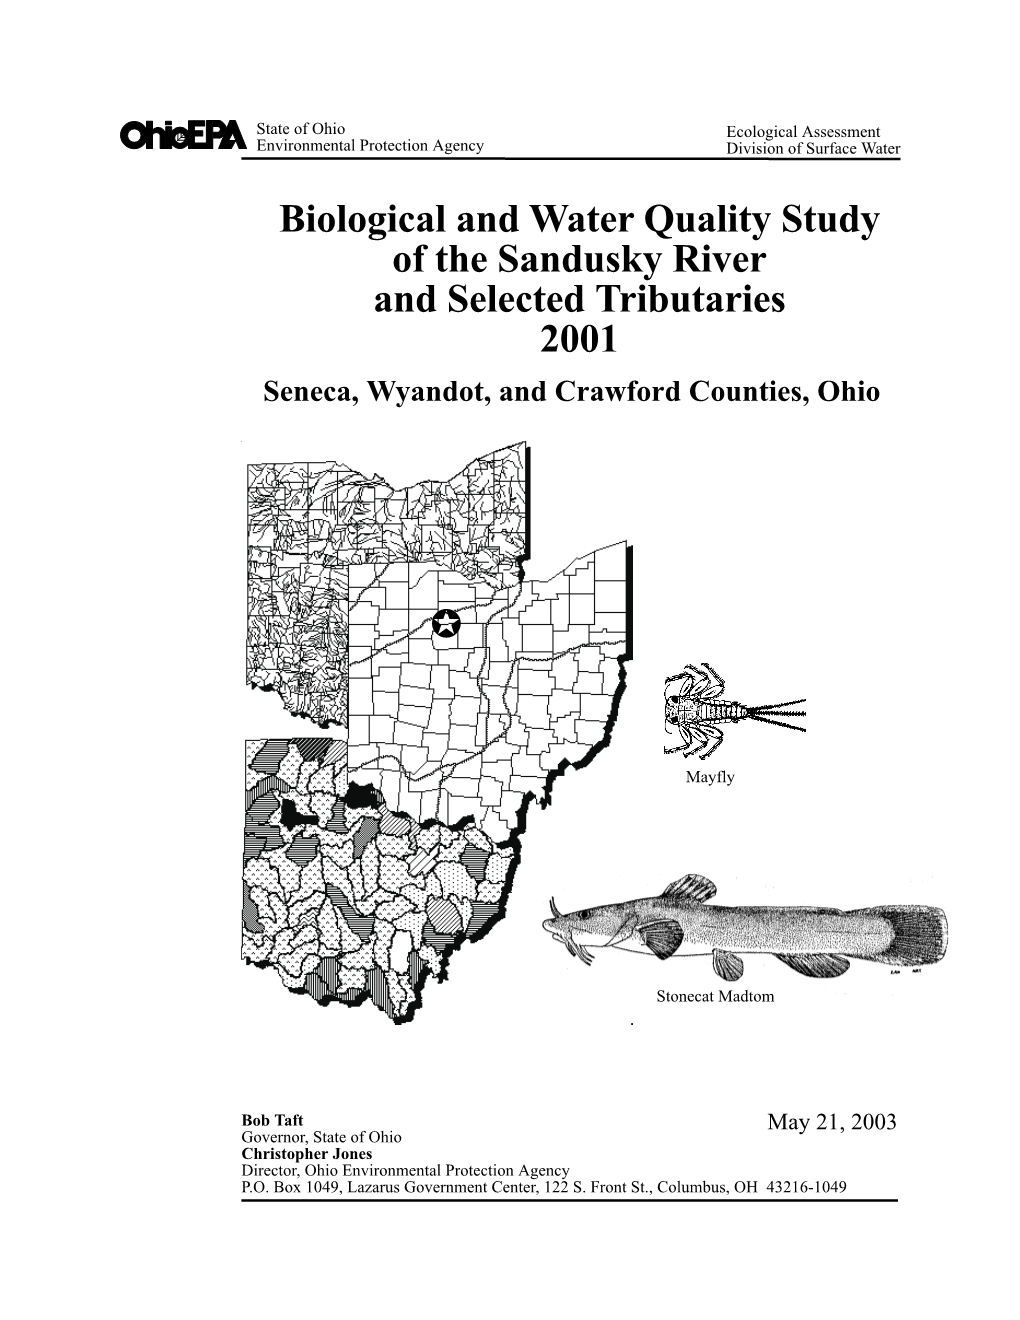 Biological and Water Quality Study of the Sandusky River and Selected Tributaries 2001 Seneca, Wyandot, and Crawford Counties, Ohio